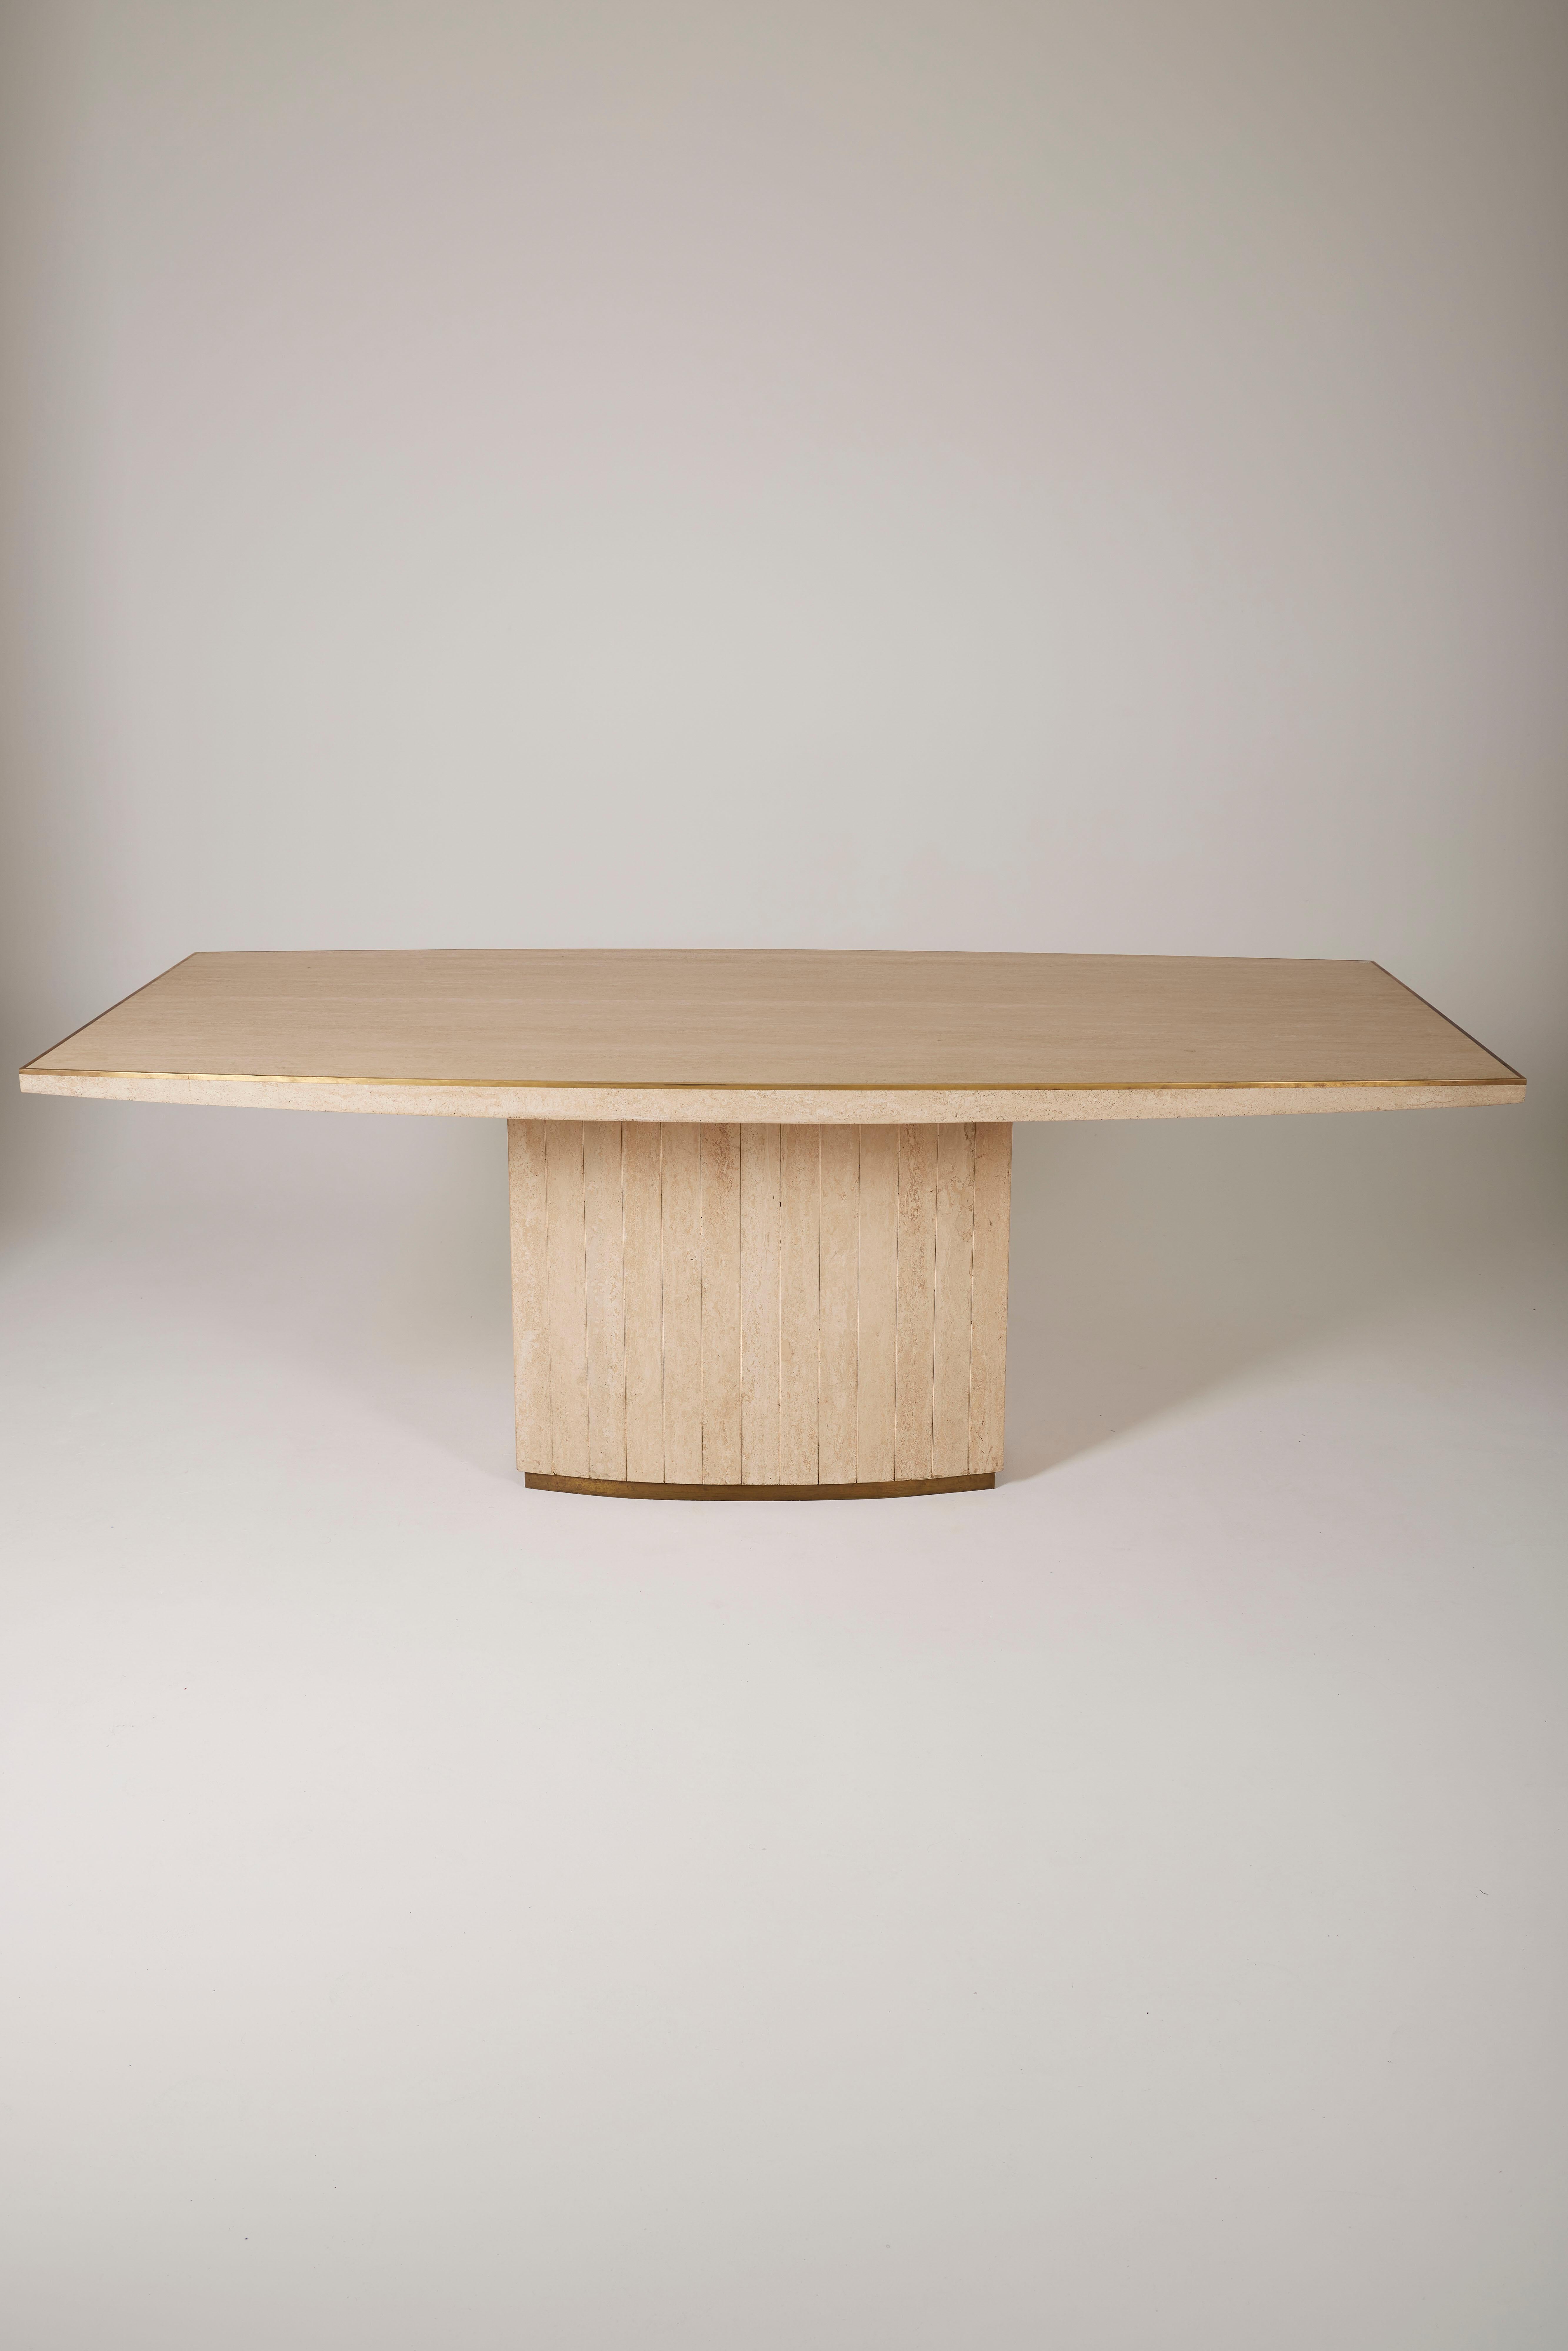 Travertine dining table by designer Willy Rizzo for Jean Charles, 1980s. Large tabletop with a brass border resting on its pedestal. Very good overall condition.
LP2086